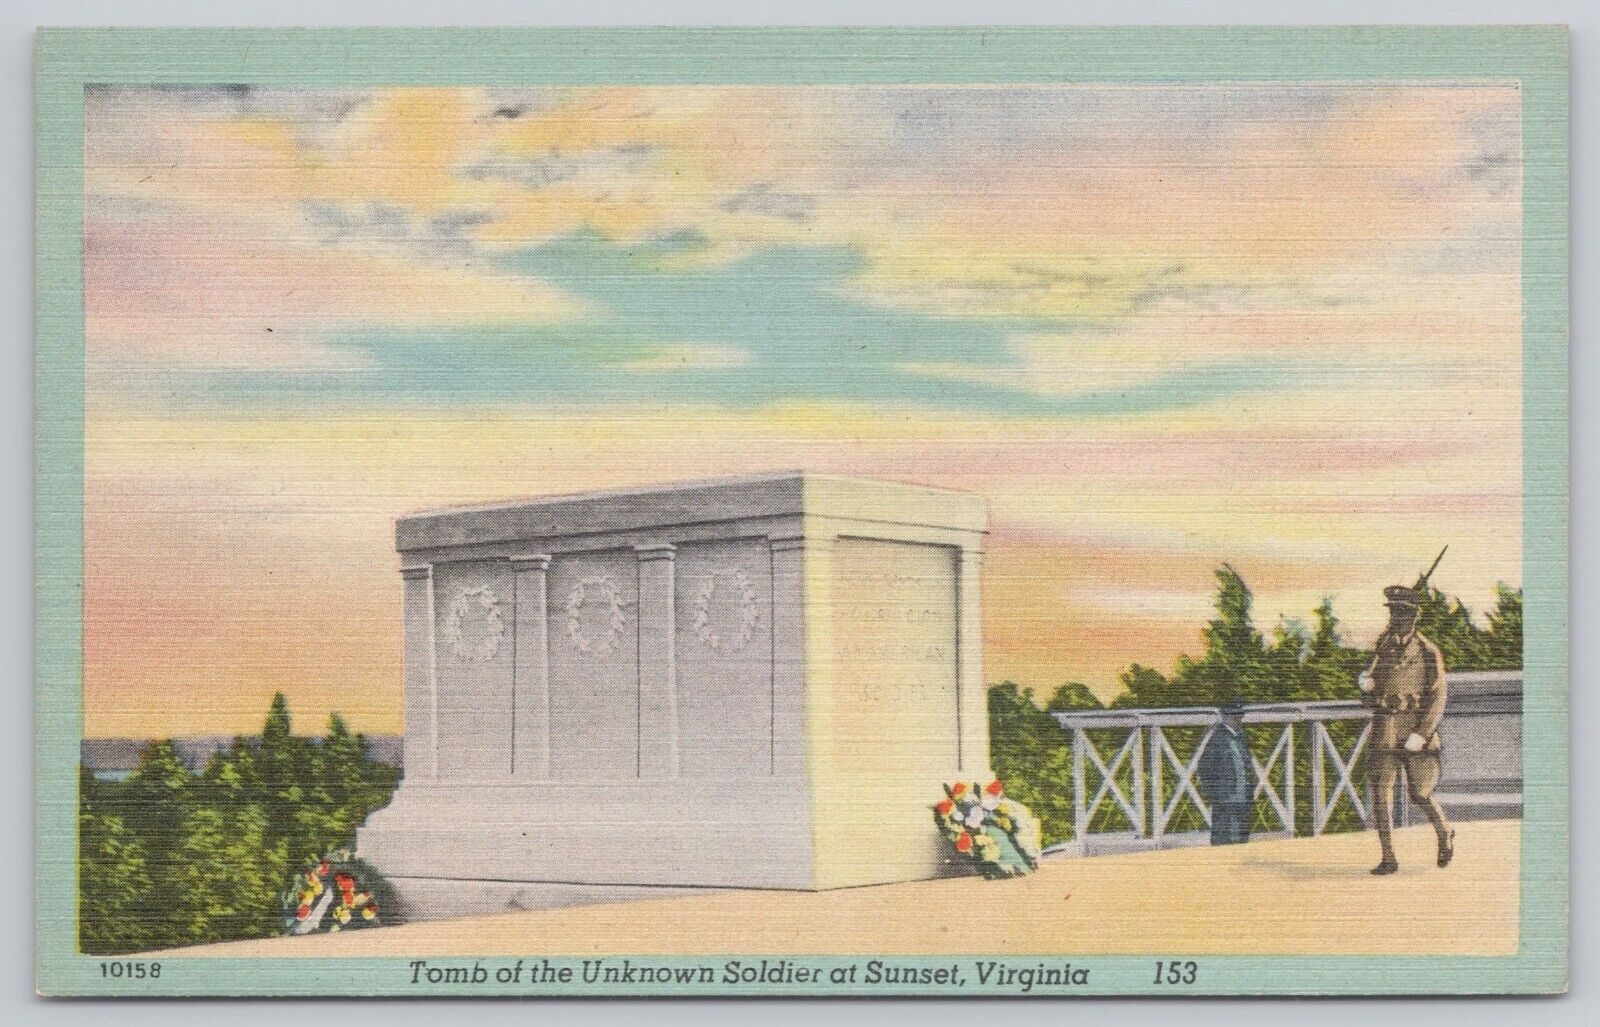 Arlington Virginia, Tomb of the Unknown Soldier at Sunset, Vtg Postcard